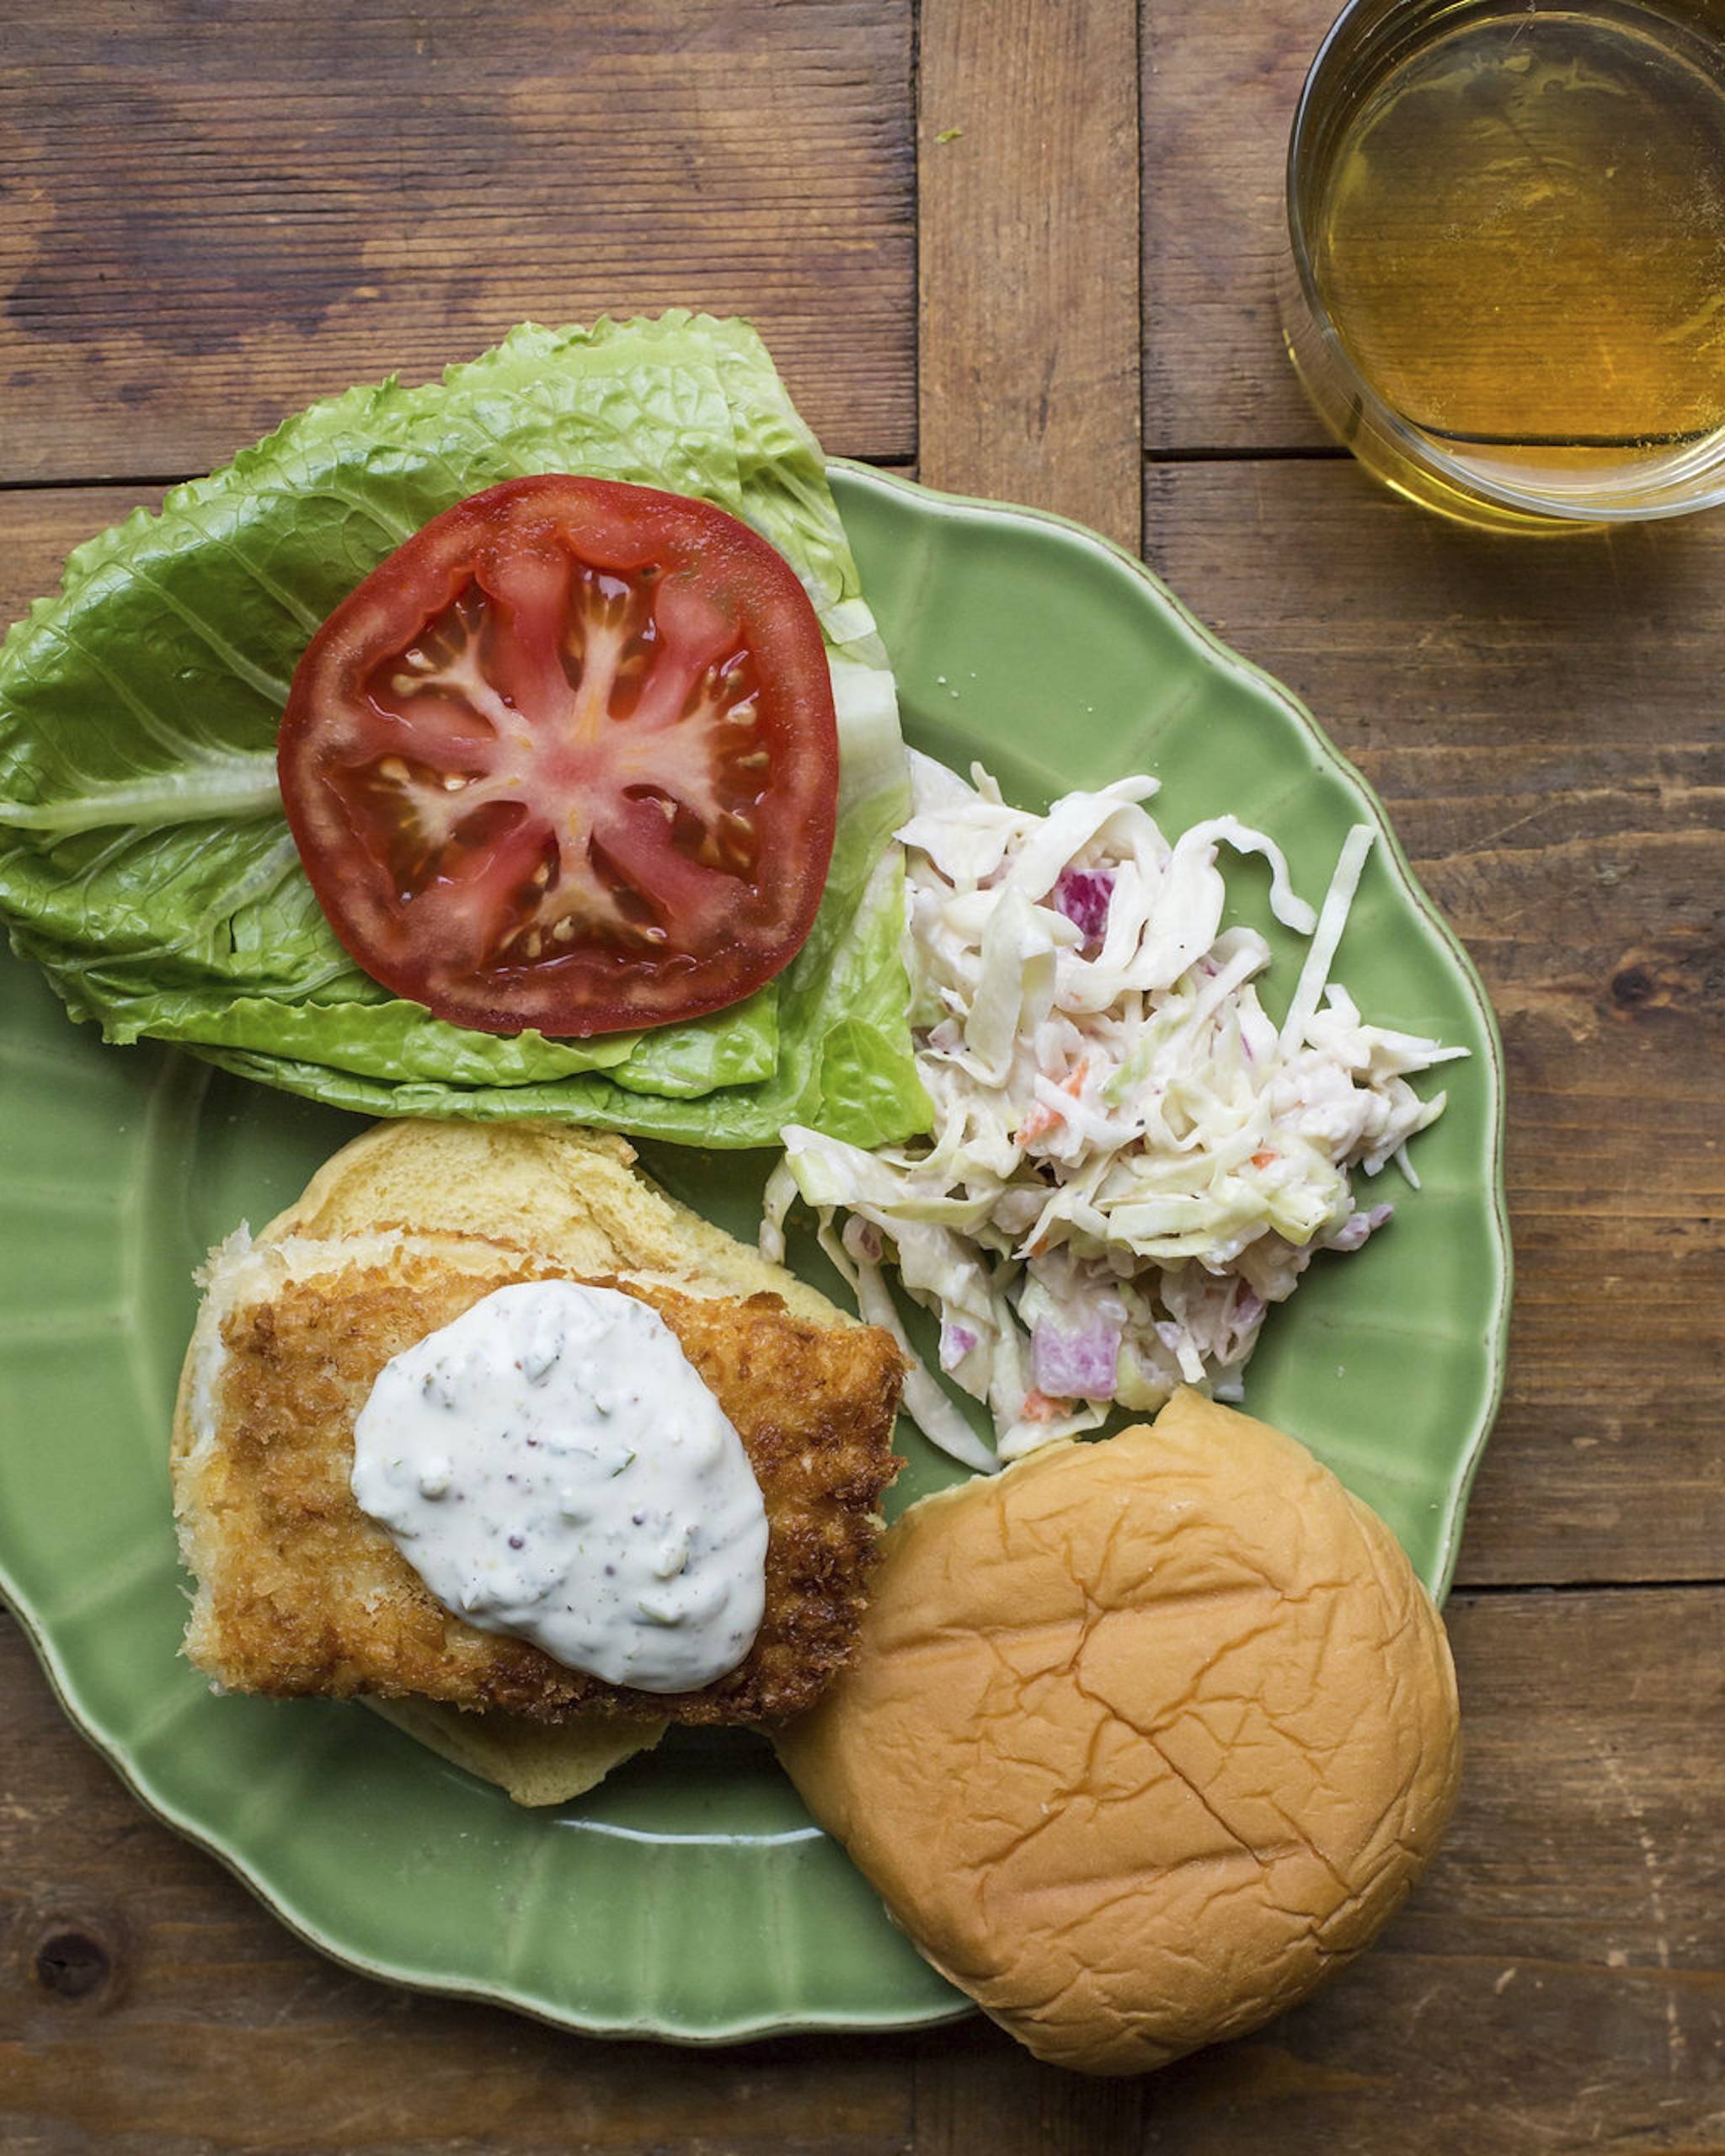 This April 6 photo shows a fried halibut fish sandwich in New York. This dish is from a recipe by Katie Workman. (Sarah E Crowder/Katie Workman via AP)